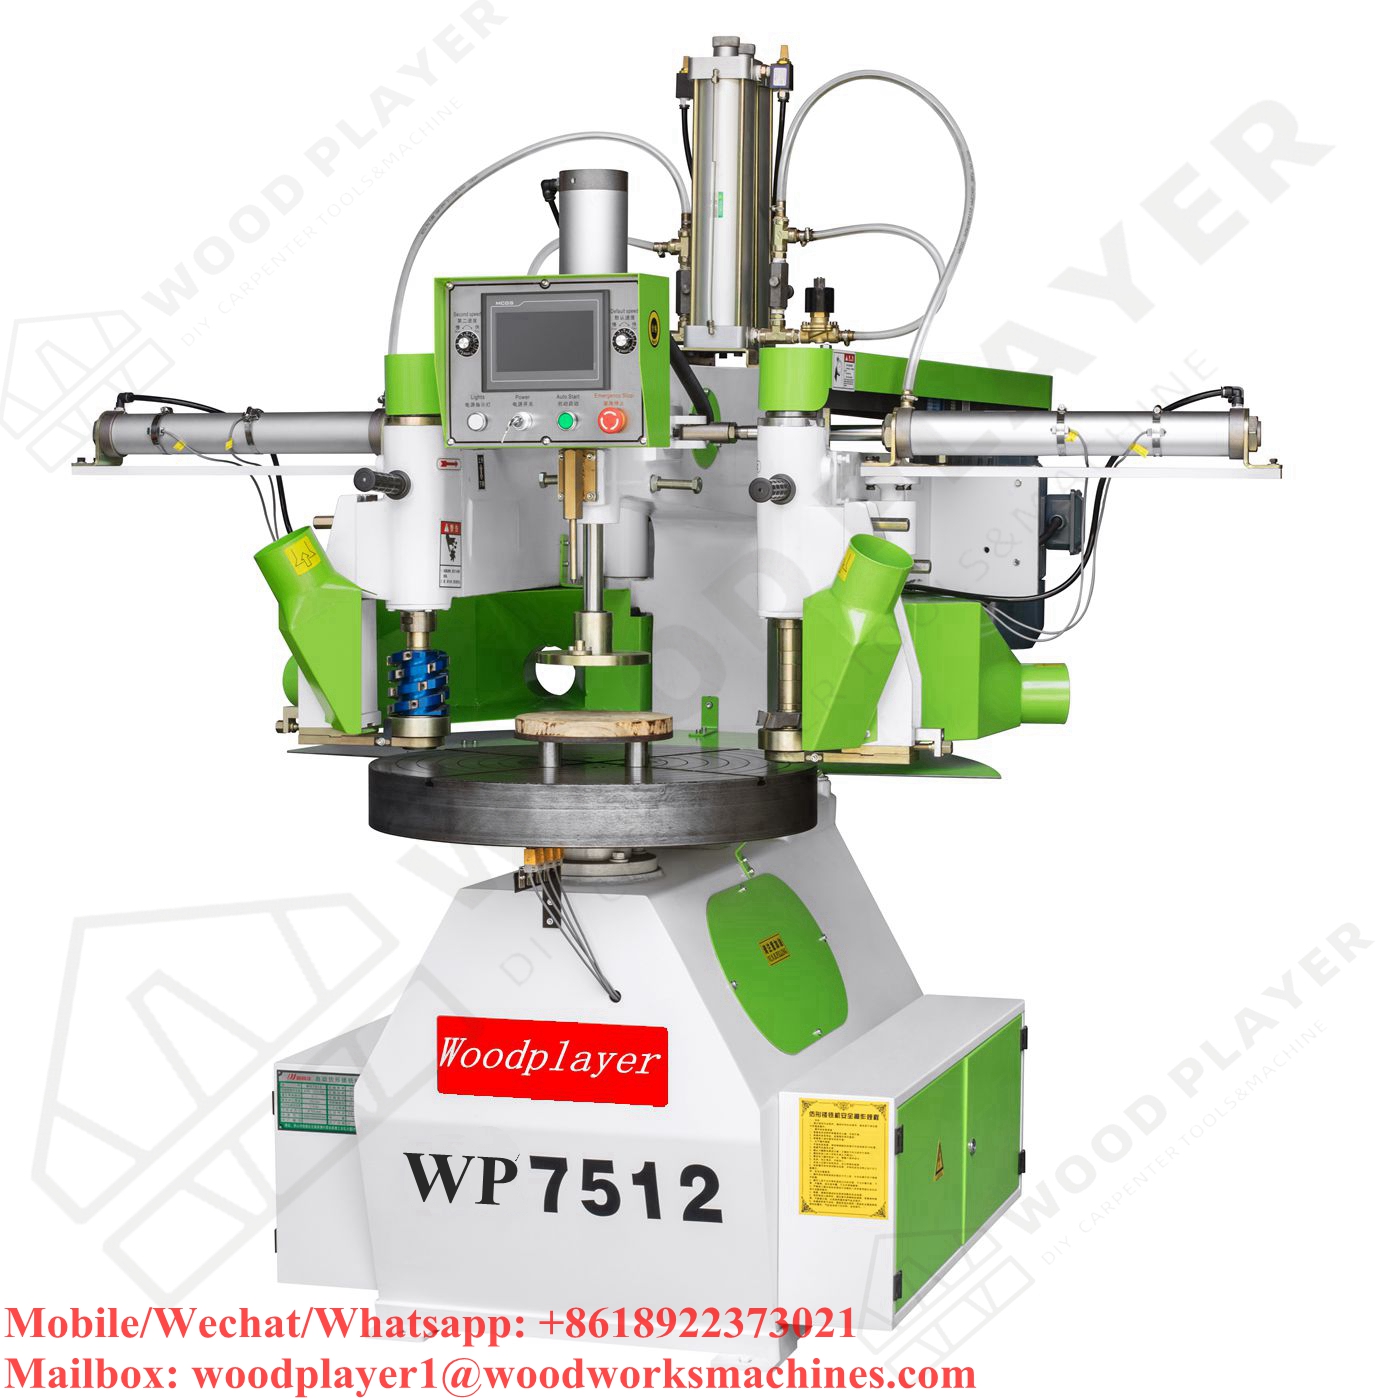 WP7512SA Twin Spindles Auto Copy Shaper Woodworking Machinery Double Axis Fully Automatic Profiling And Routing Machine